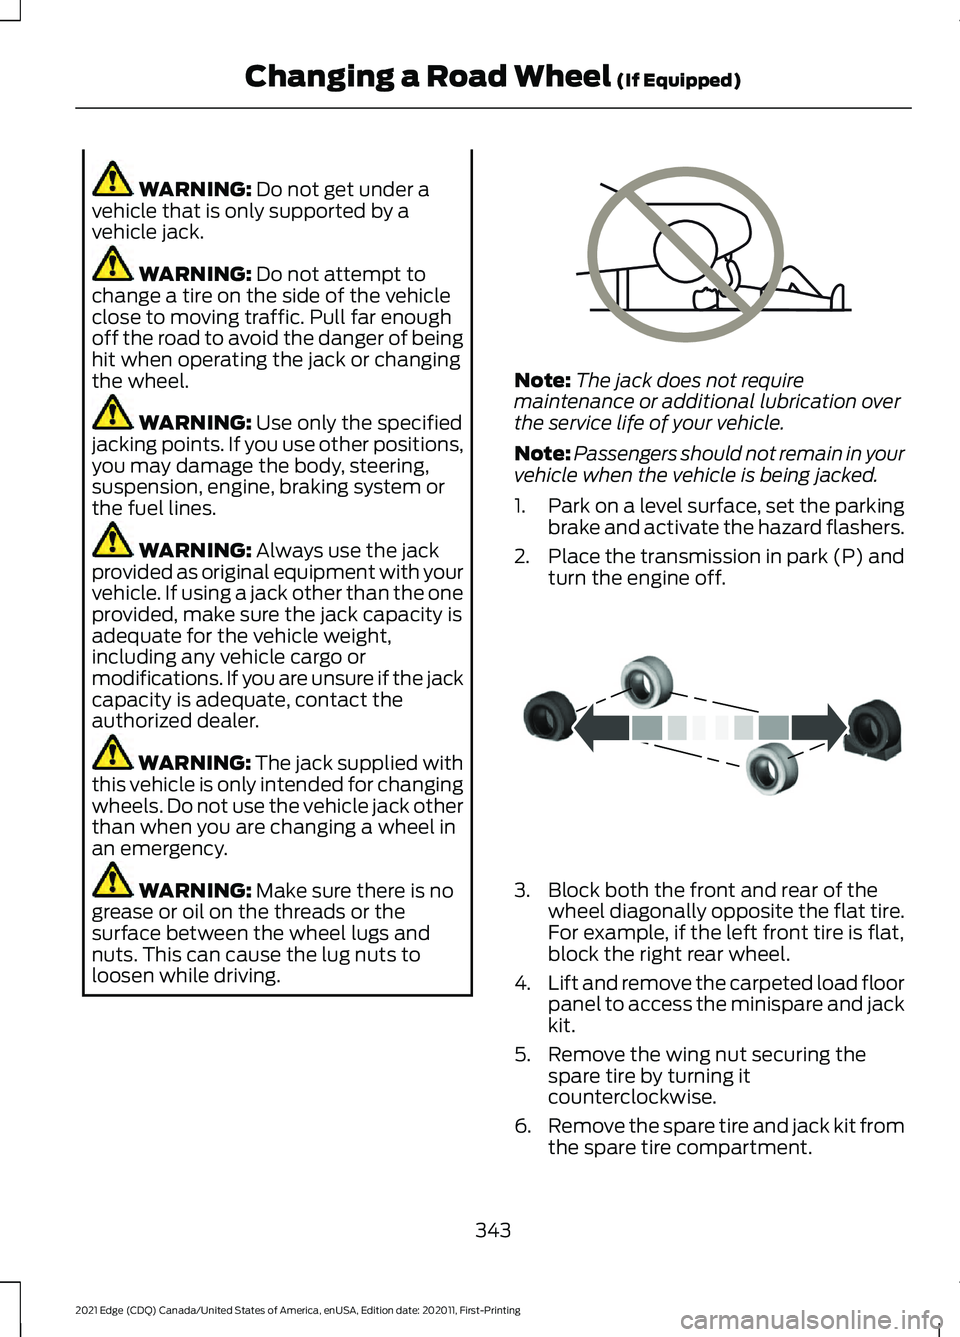 FORD EDGE 2021  Owners Manual WARNING: Do not get under a
vehicle that is only supported by a
vehicle jack. WARNING: 
Do not attempt to
change a tire on the side of the vehicle
close to moving traffic. Pull far enough
off the road